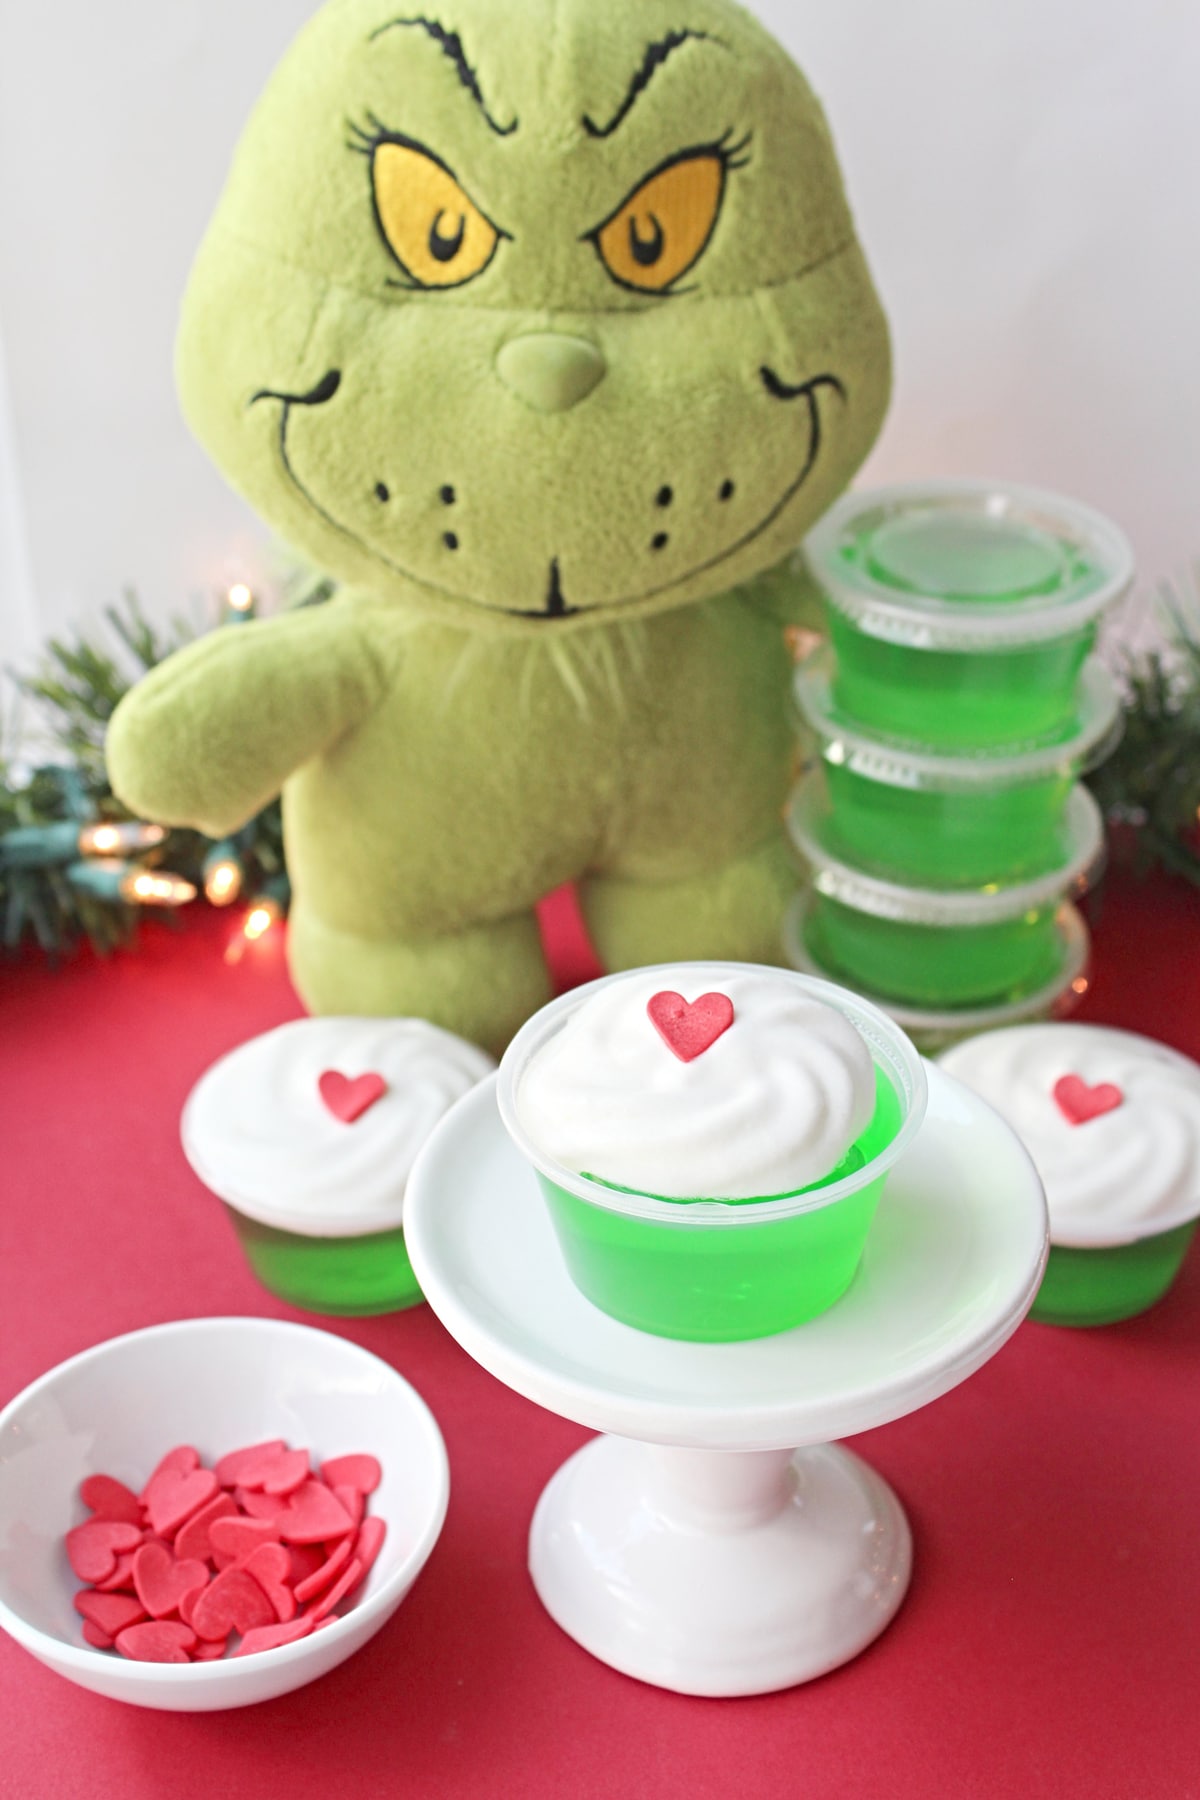 The Grinch Jello Shots with the Grinch plush character at the back.